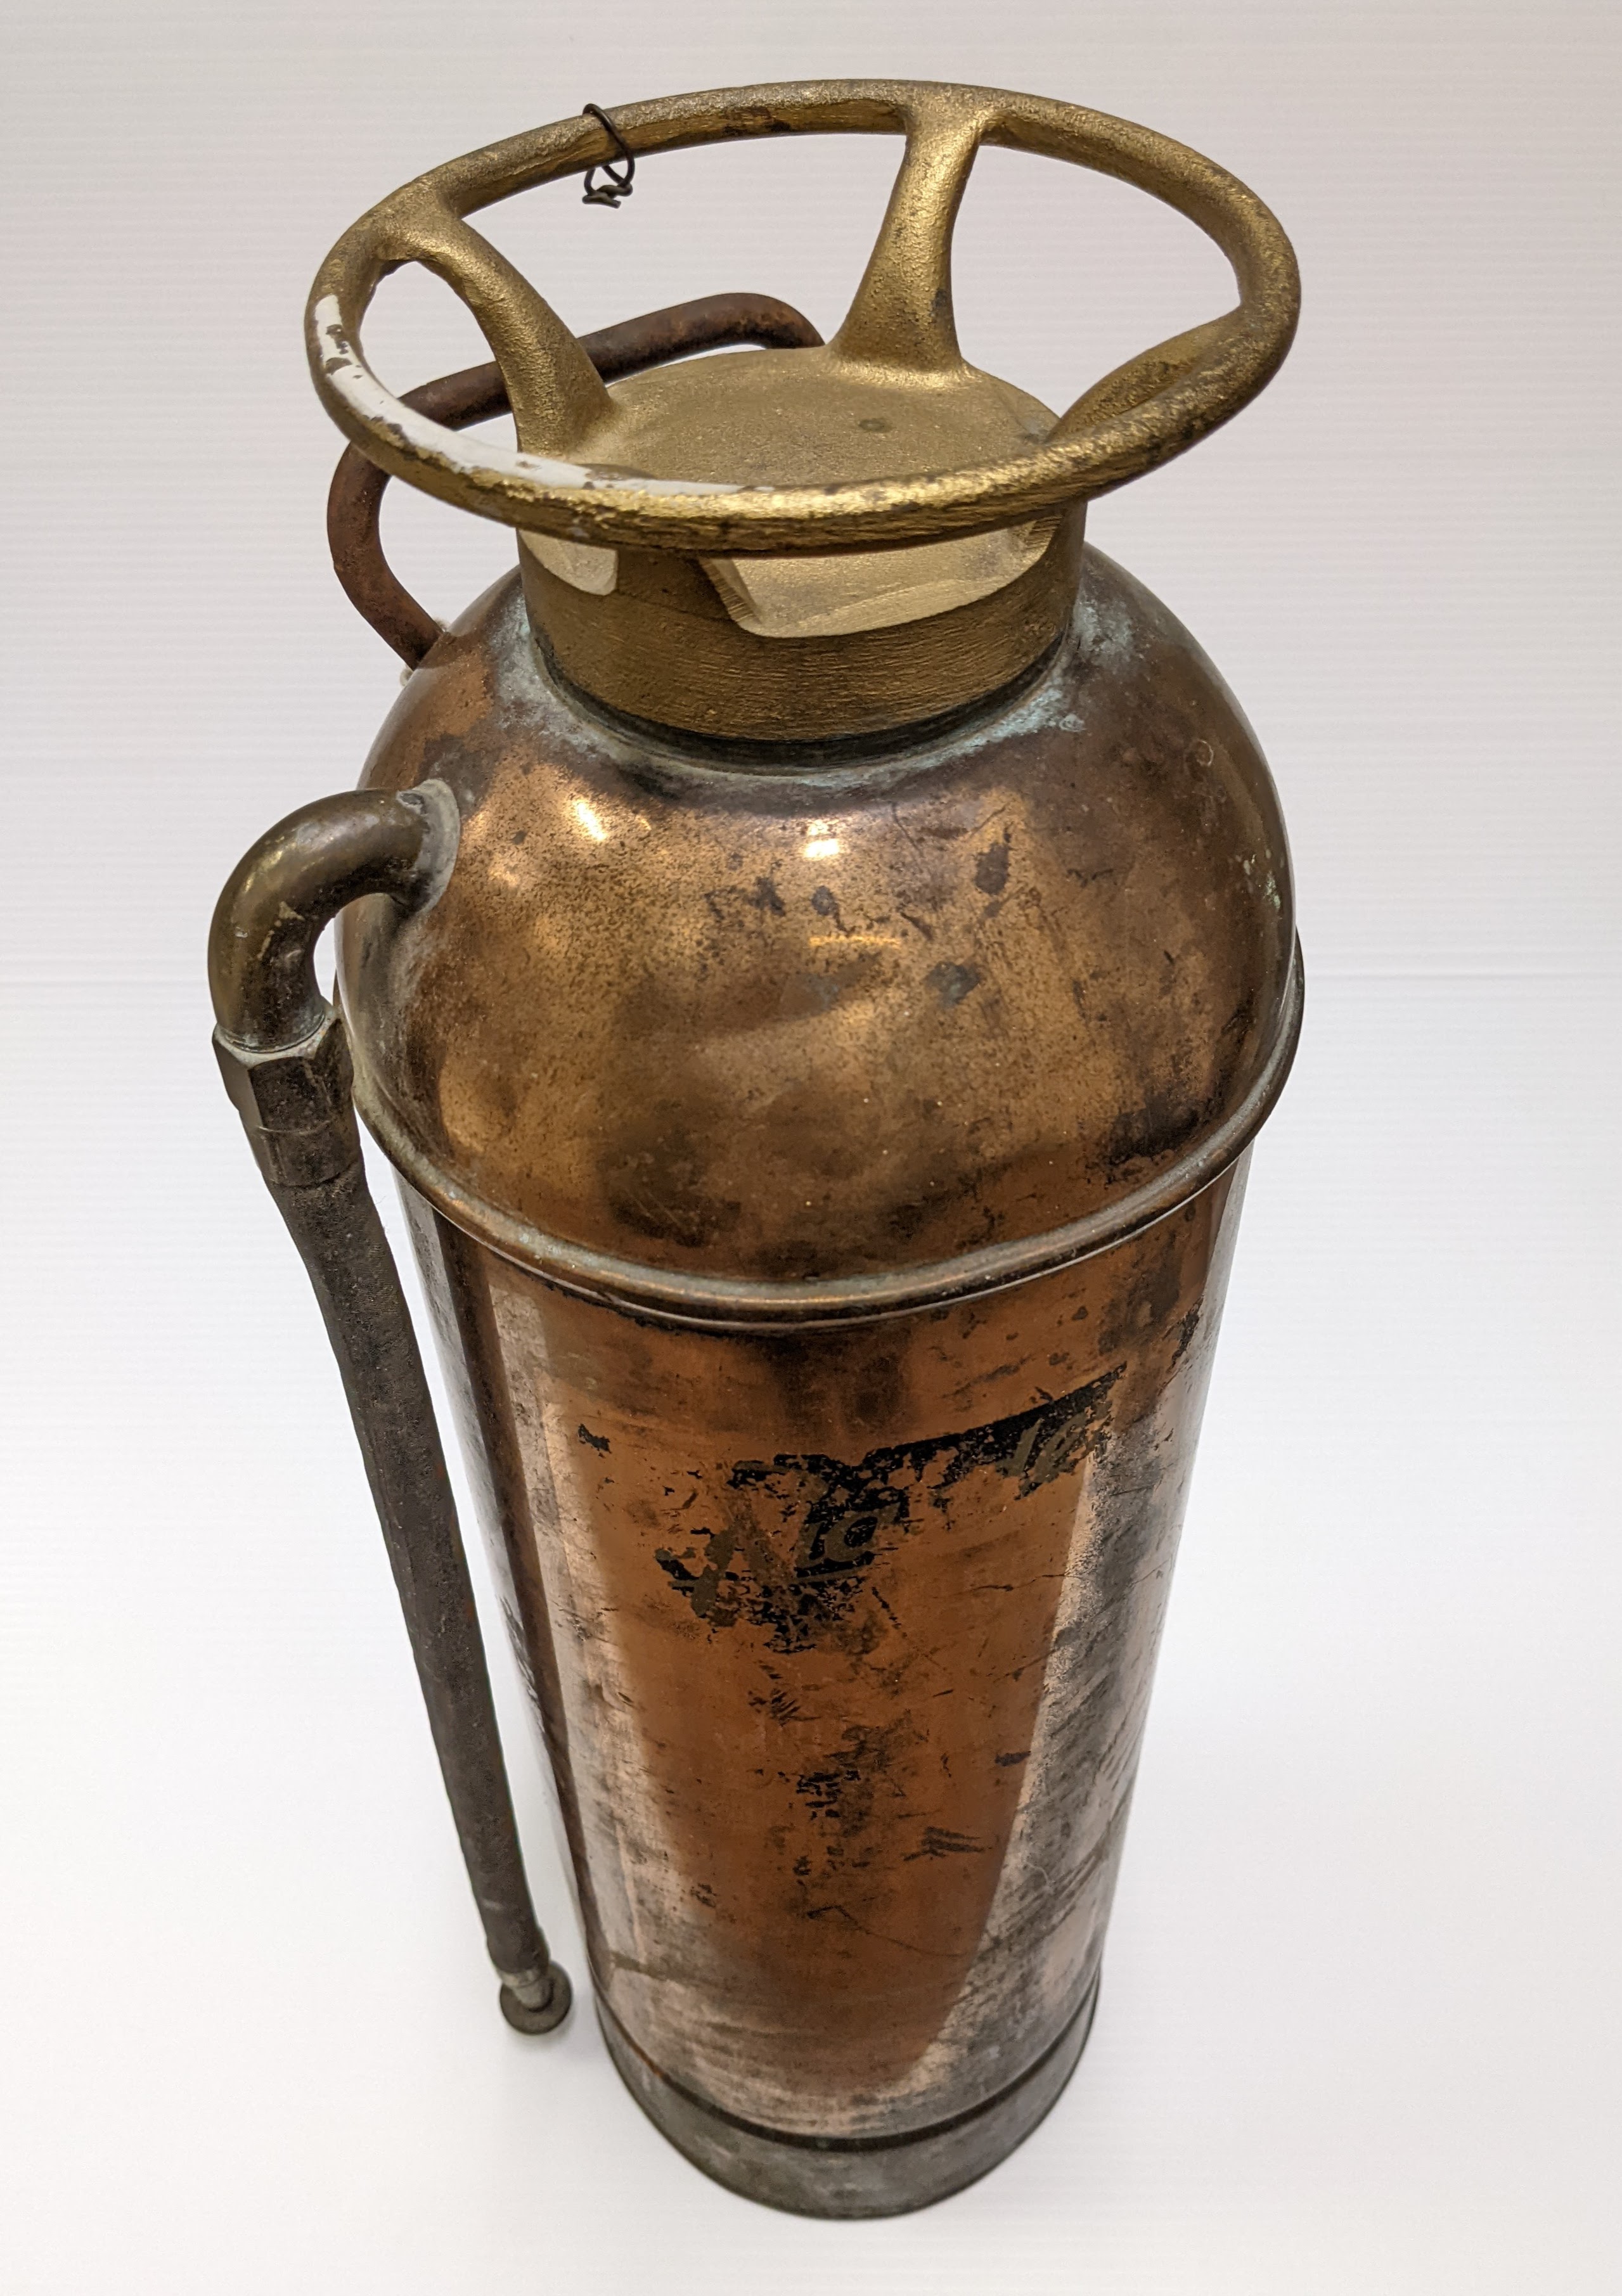 This fire extinguisher comes from the Fort Vermilion Experimental Farm. "Guardene" brand, it is an inversion style extinguisher - meaning to use it one has to flip it upside down and hold it from the bottom. This action causes the internal elements (hydrochloric acid and Bicarbonate soda dissolved in water) to mix and react - producing carbon dioxide gas. The pressure created by this chemical reaction then forces the contents of the tank (water, acid, and carbon dioxide) out the rubber hose for the operator to direct on the flames. The soldering job on the back indicate the tank was repaired at one point and the rivets date it as pre-1942.
17/01/2022
2020.07.18 / Cranna, Marilee